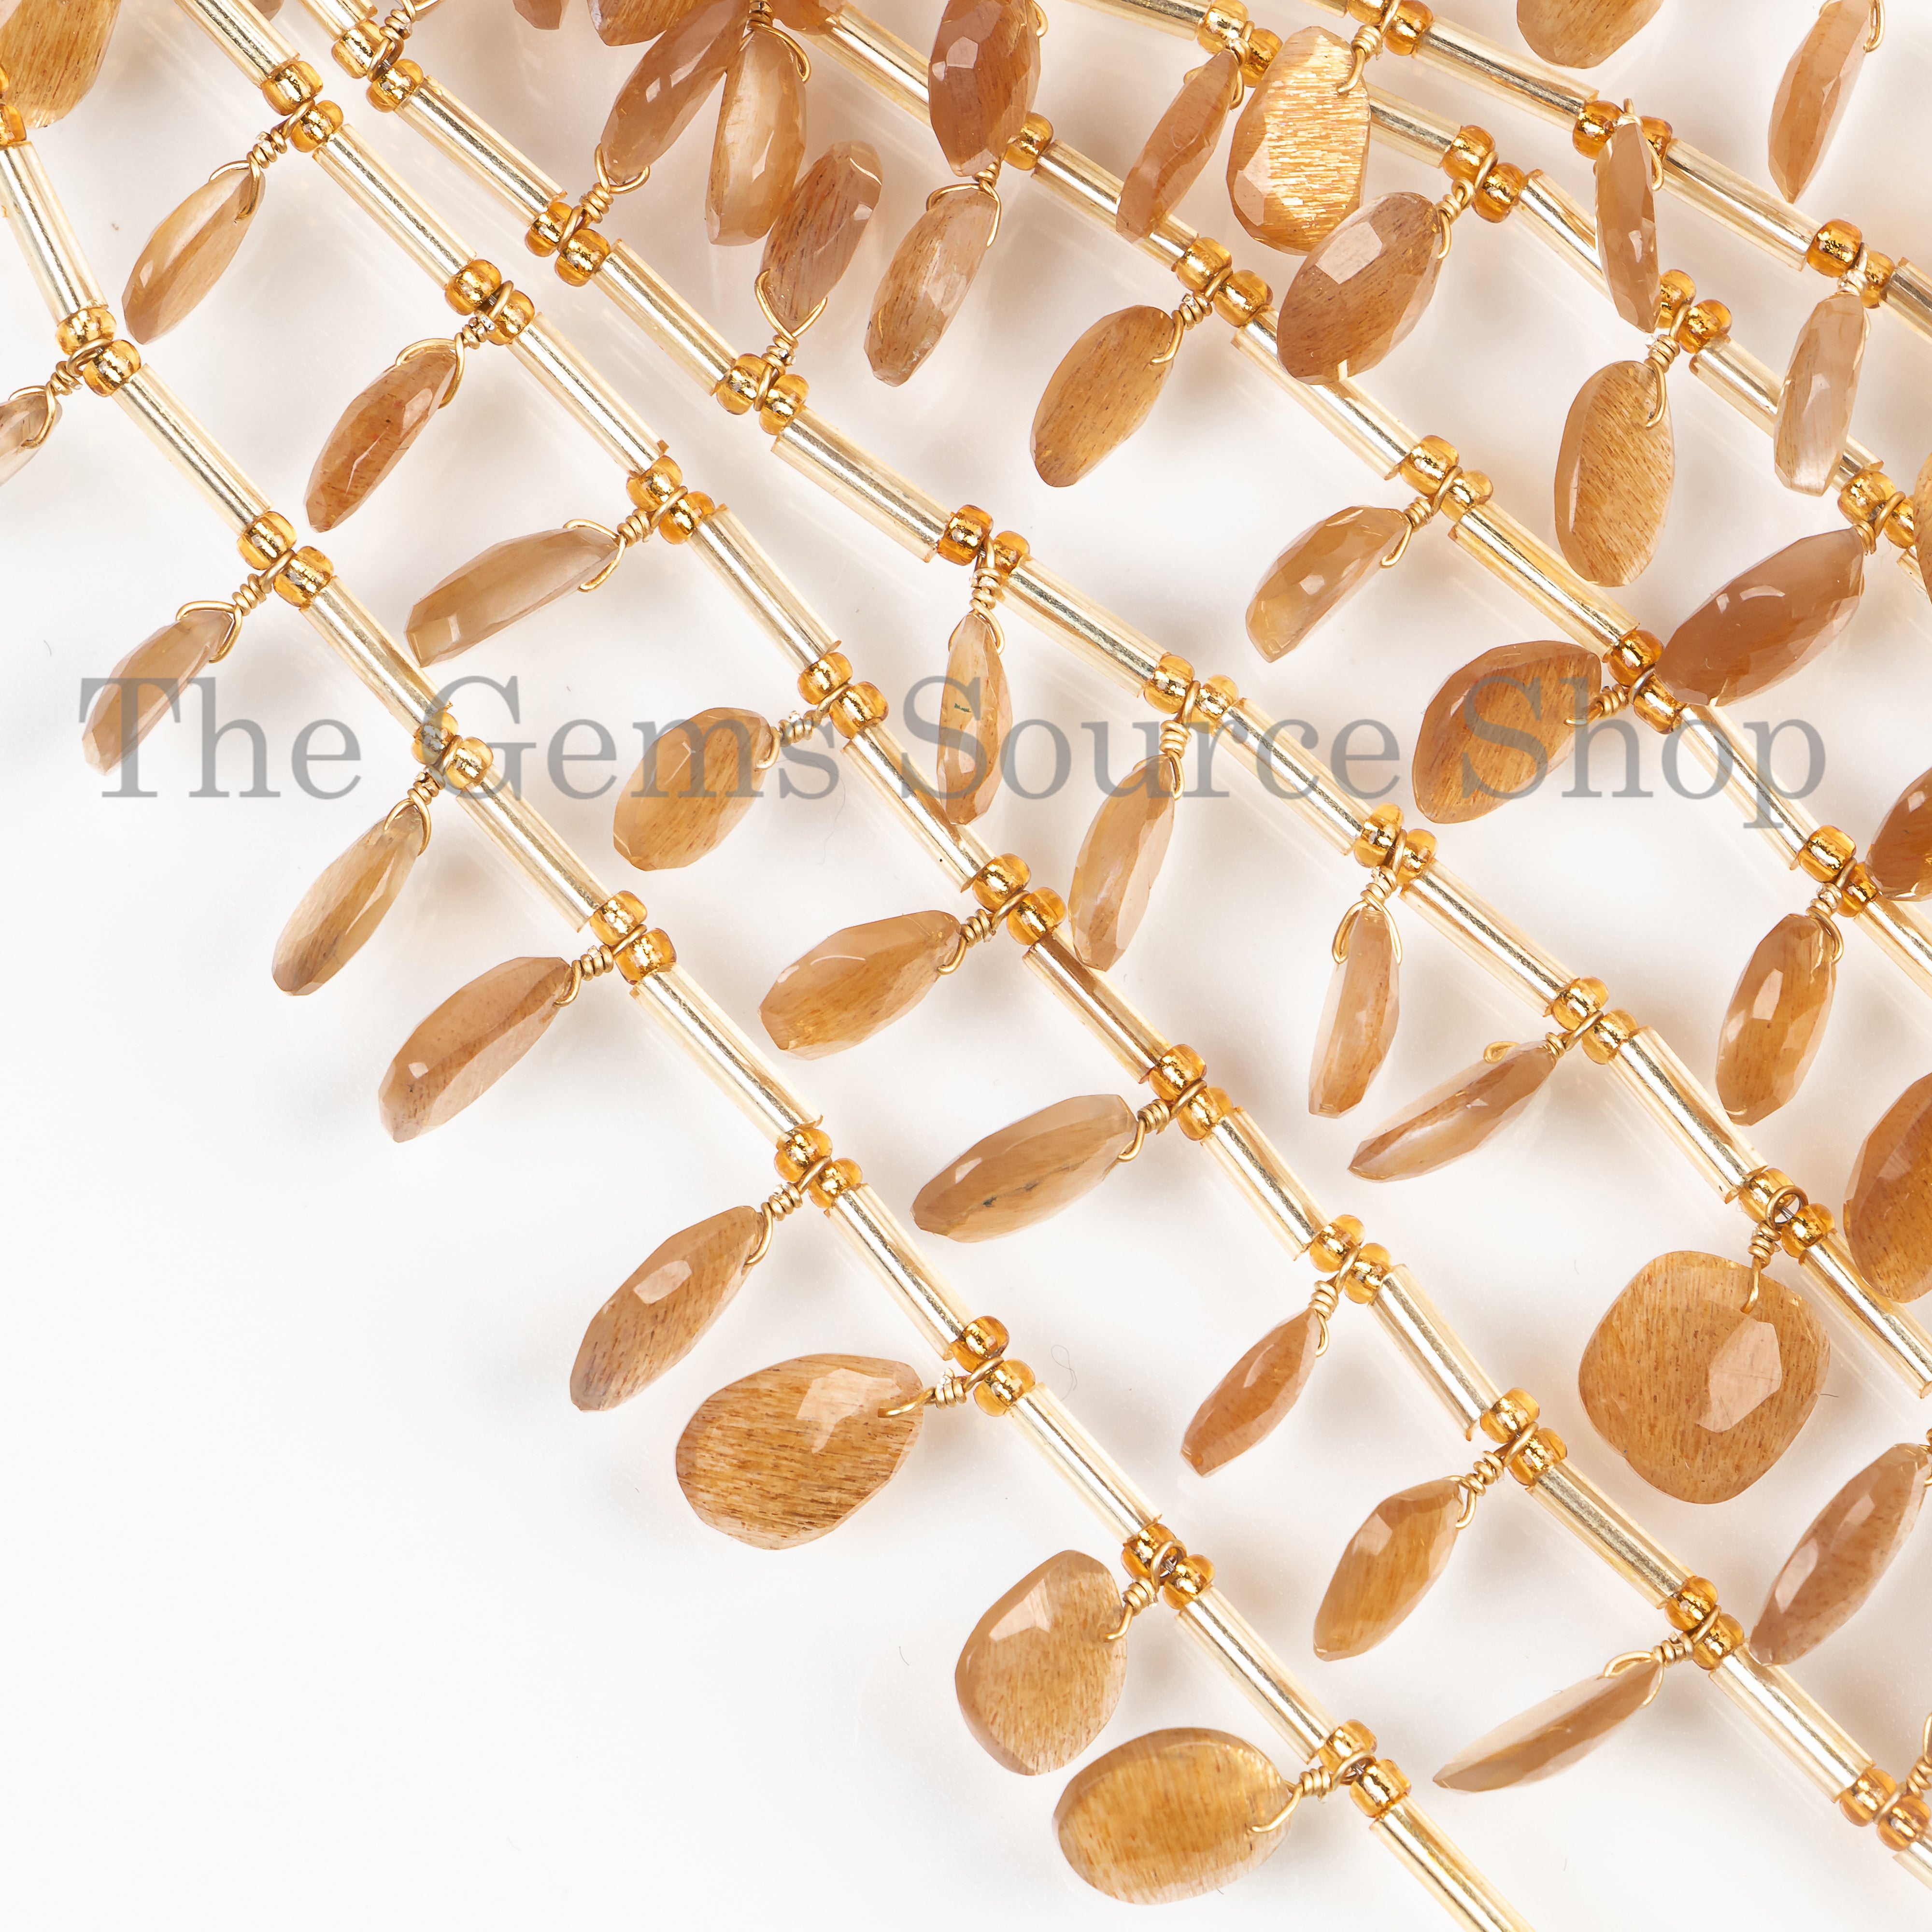 Golden Moonstone Beads, Face Drill Beads, Front to Back Drilled, Rosecut Beads, Fancy Beads, Flat Cabs Faceted Briolette, Moonstone Beads